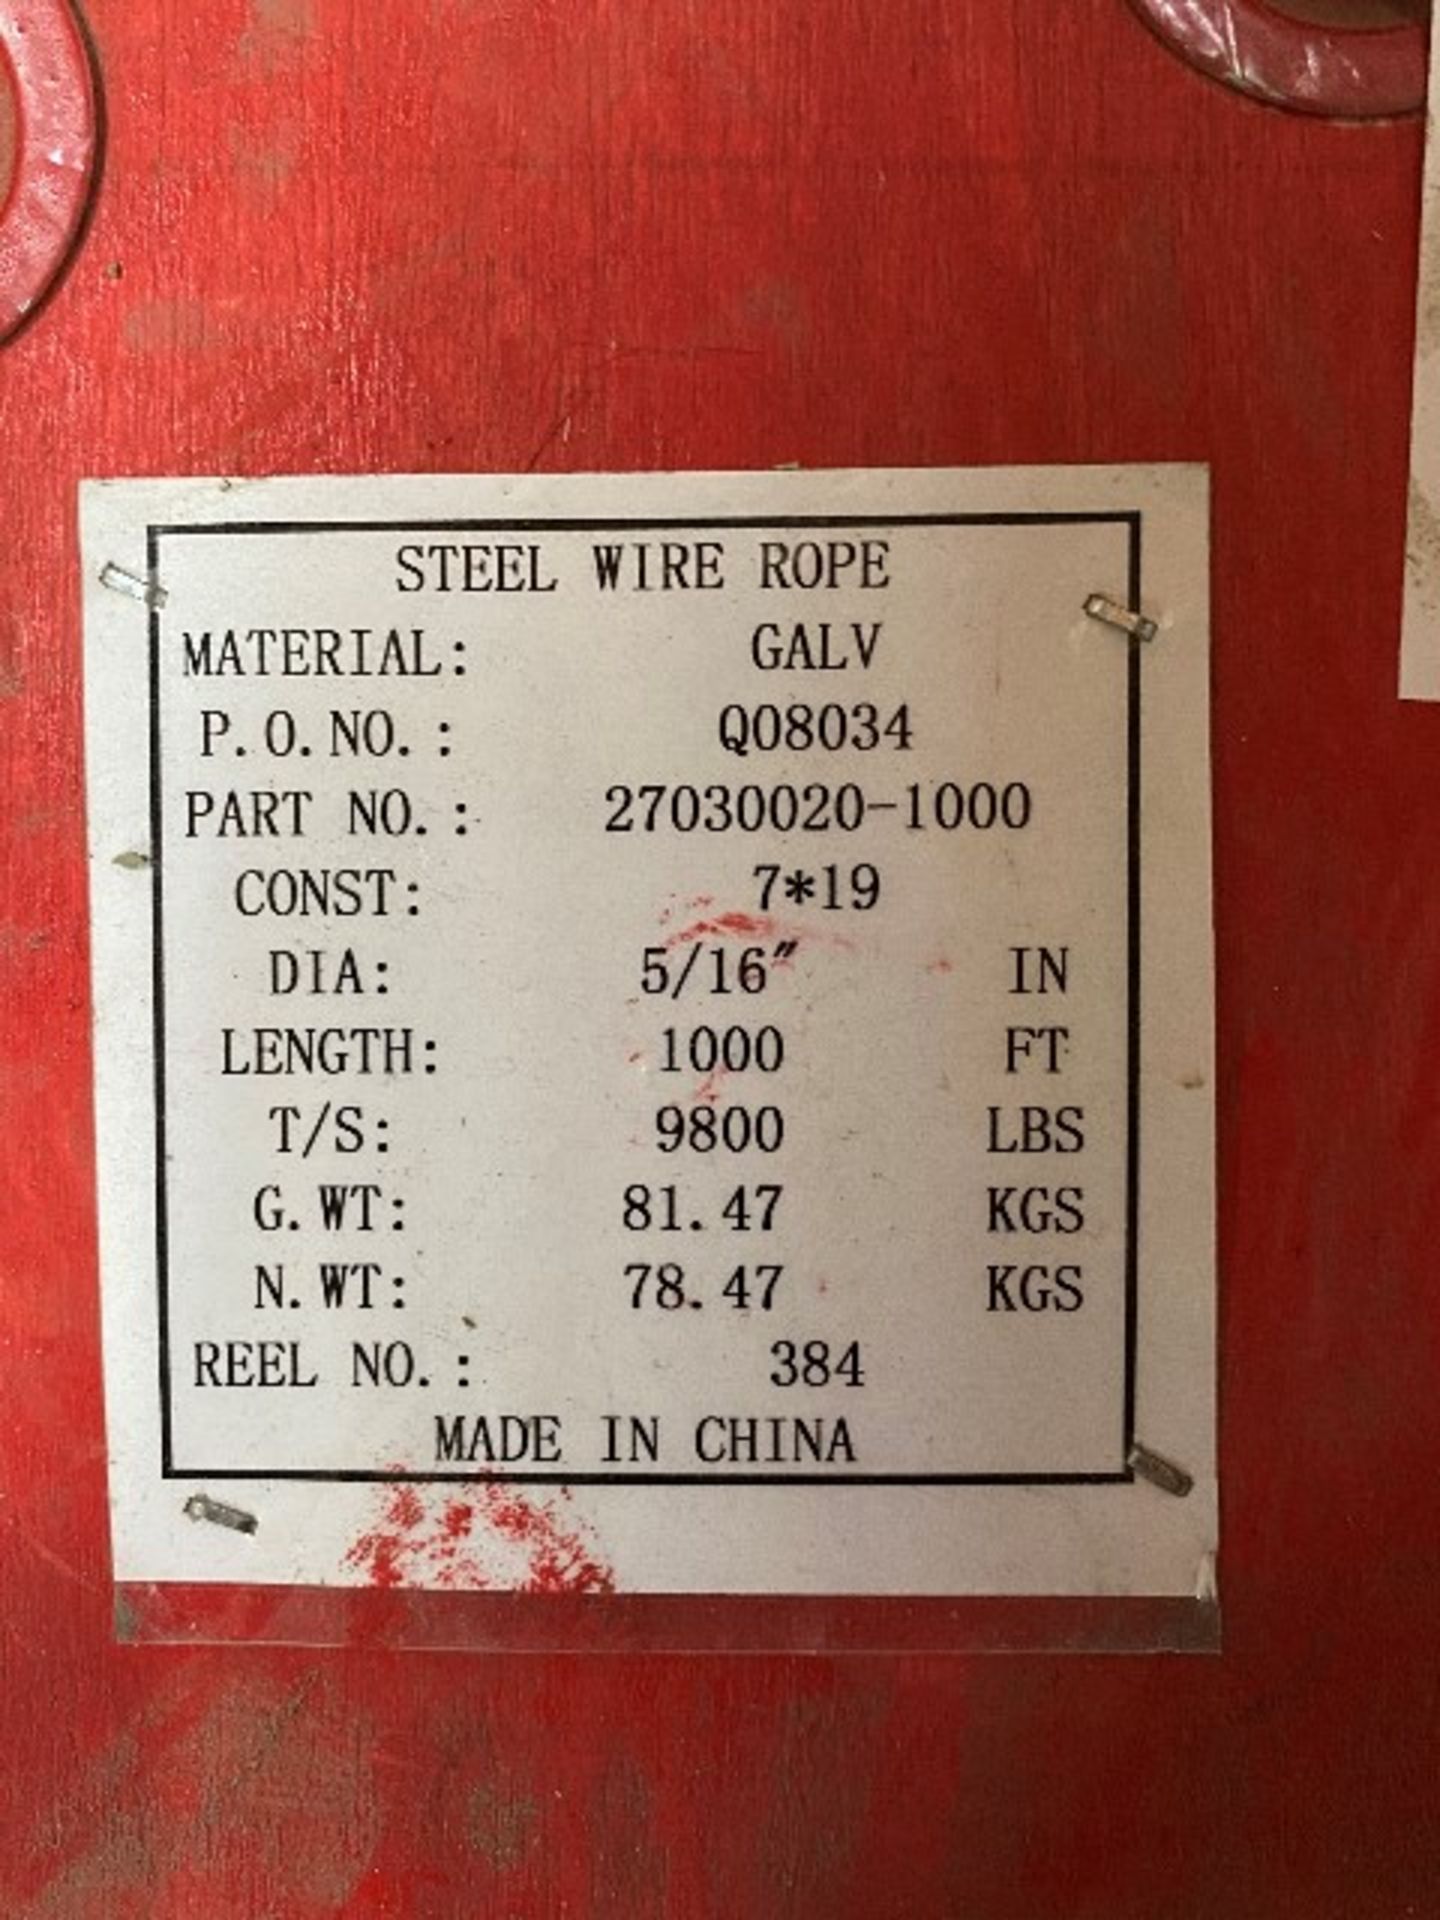 Galvanized steel wire rope, 5/16”, 1000ft - Image 2 of 2